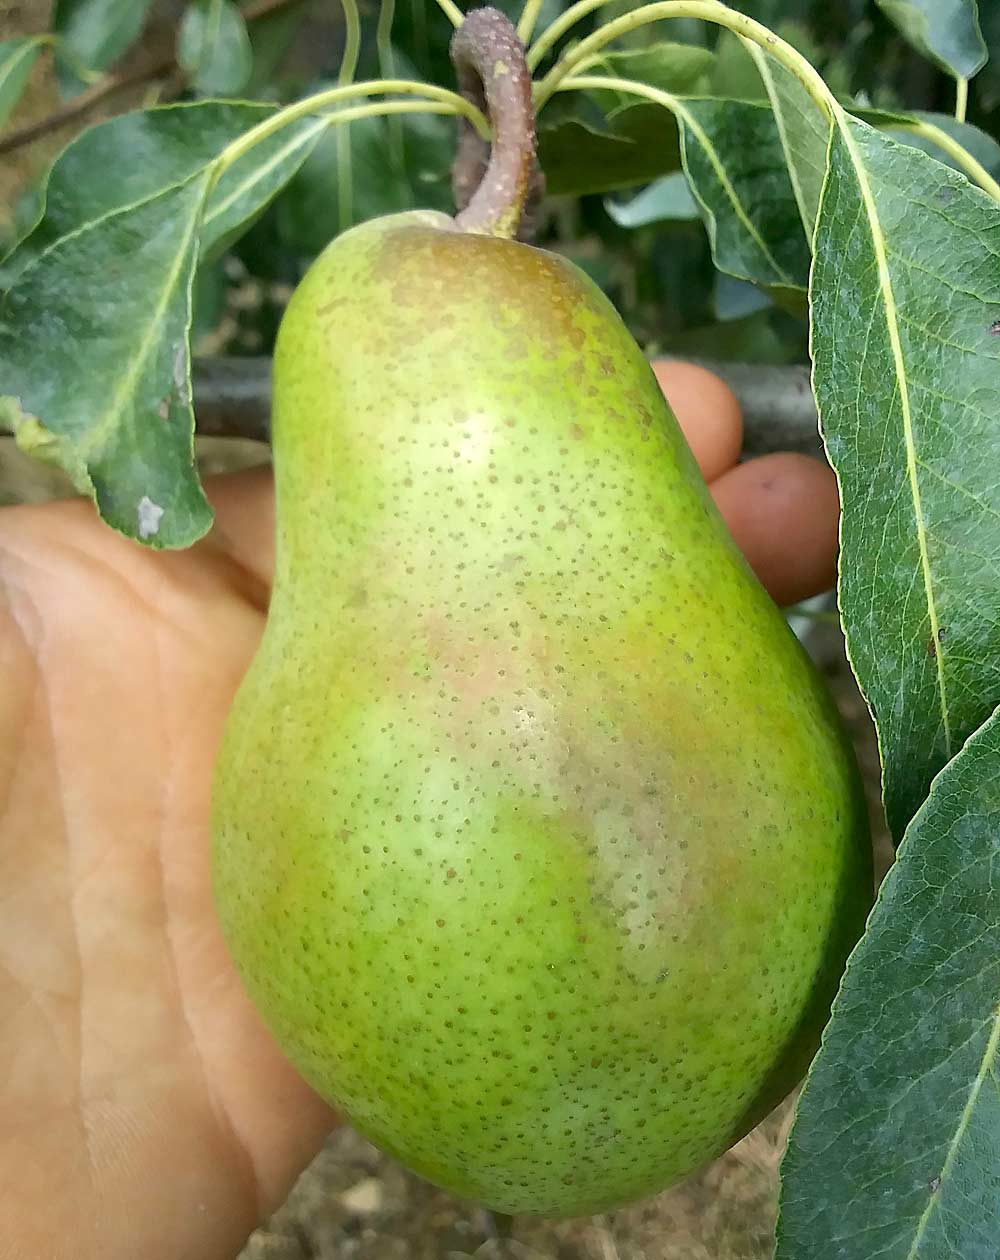 A Shenandoah pear, one of the new varieties at Kauffman’s Fruit Farm. Clair Kauffman said the biggest challenge with pears will be connecting them with consumers. (Courtesy Clair Kauffman)